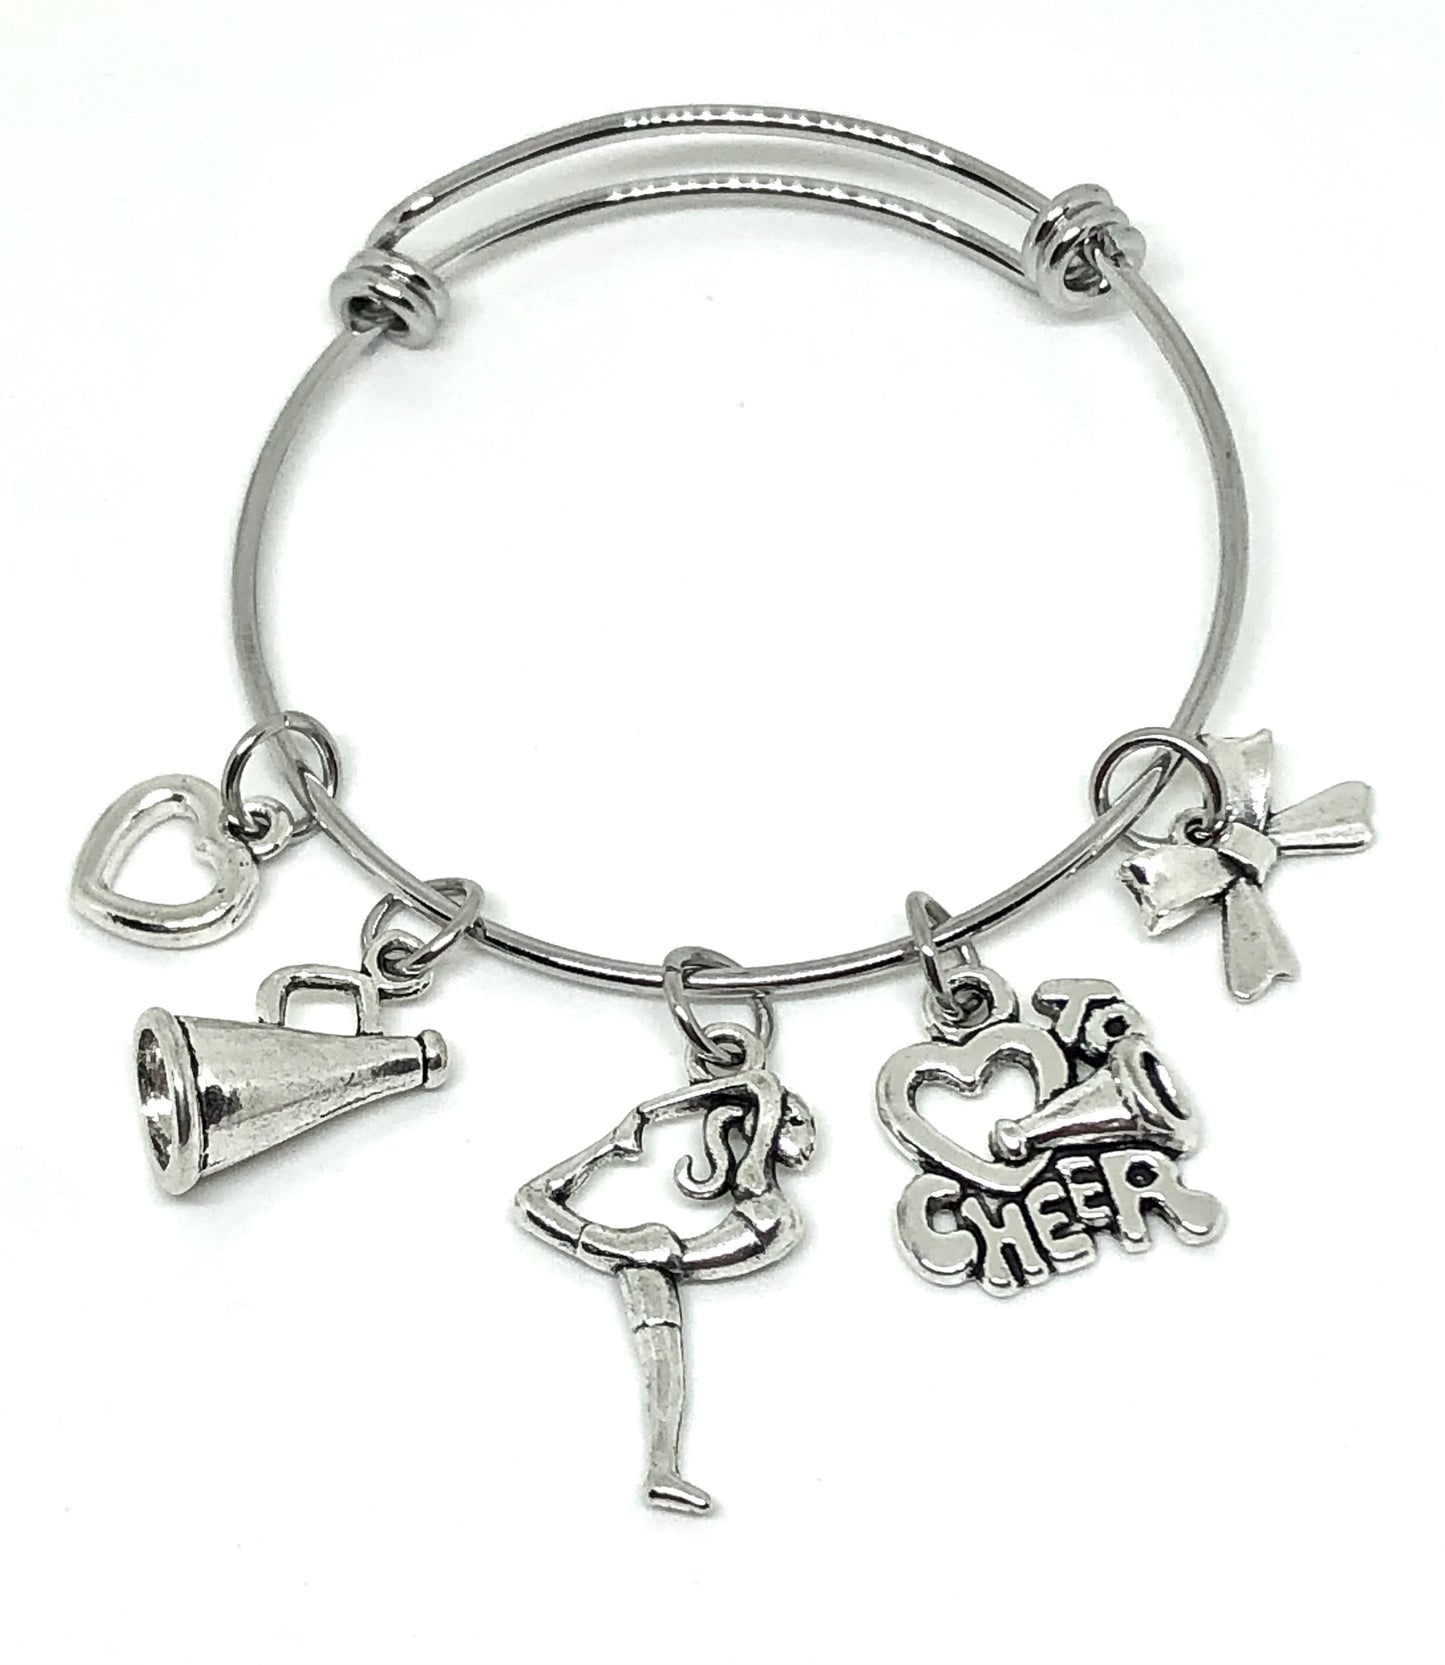 Load image into Gallery viewer, Cheerleading Charm Bangle Bracelet - Love to Cheer - Cheer and Dance On Demand
